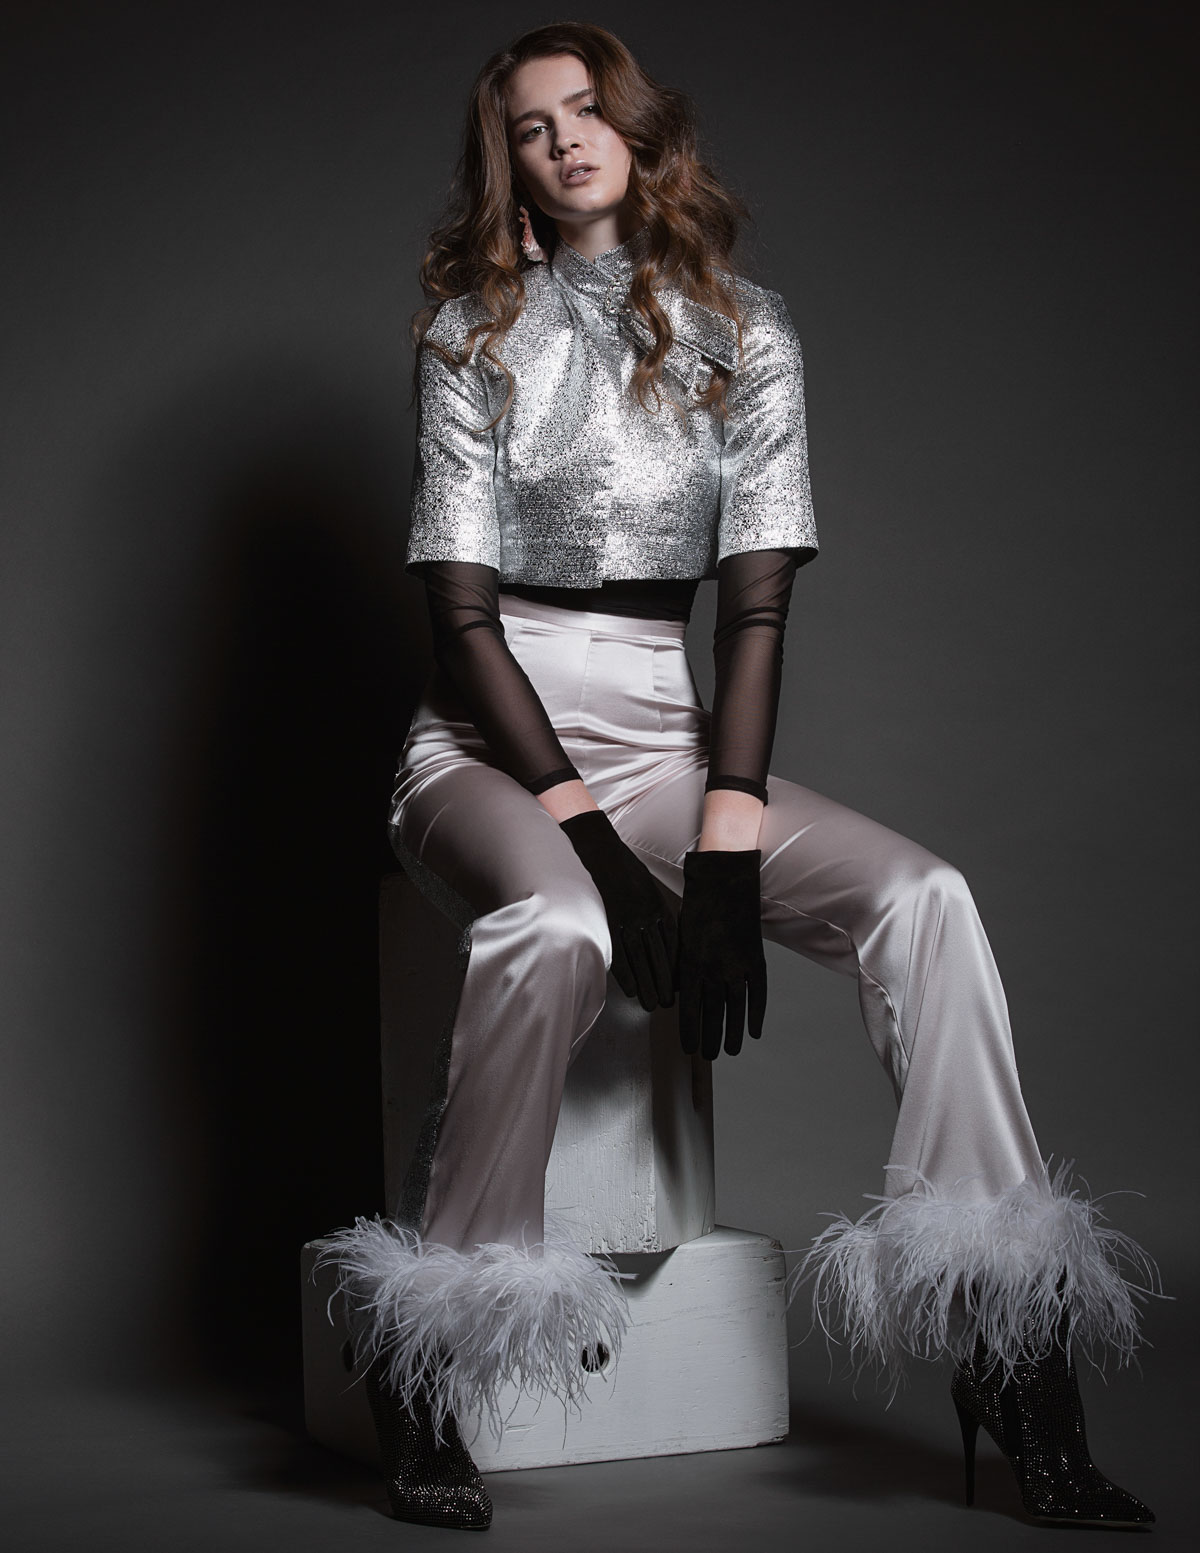 A fashion model posing seated in silver jacket and pants with feather accents